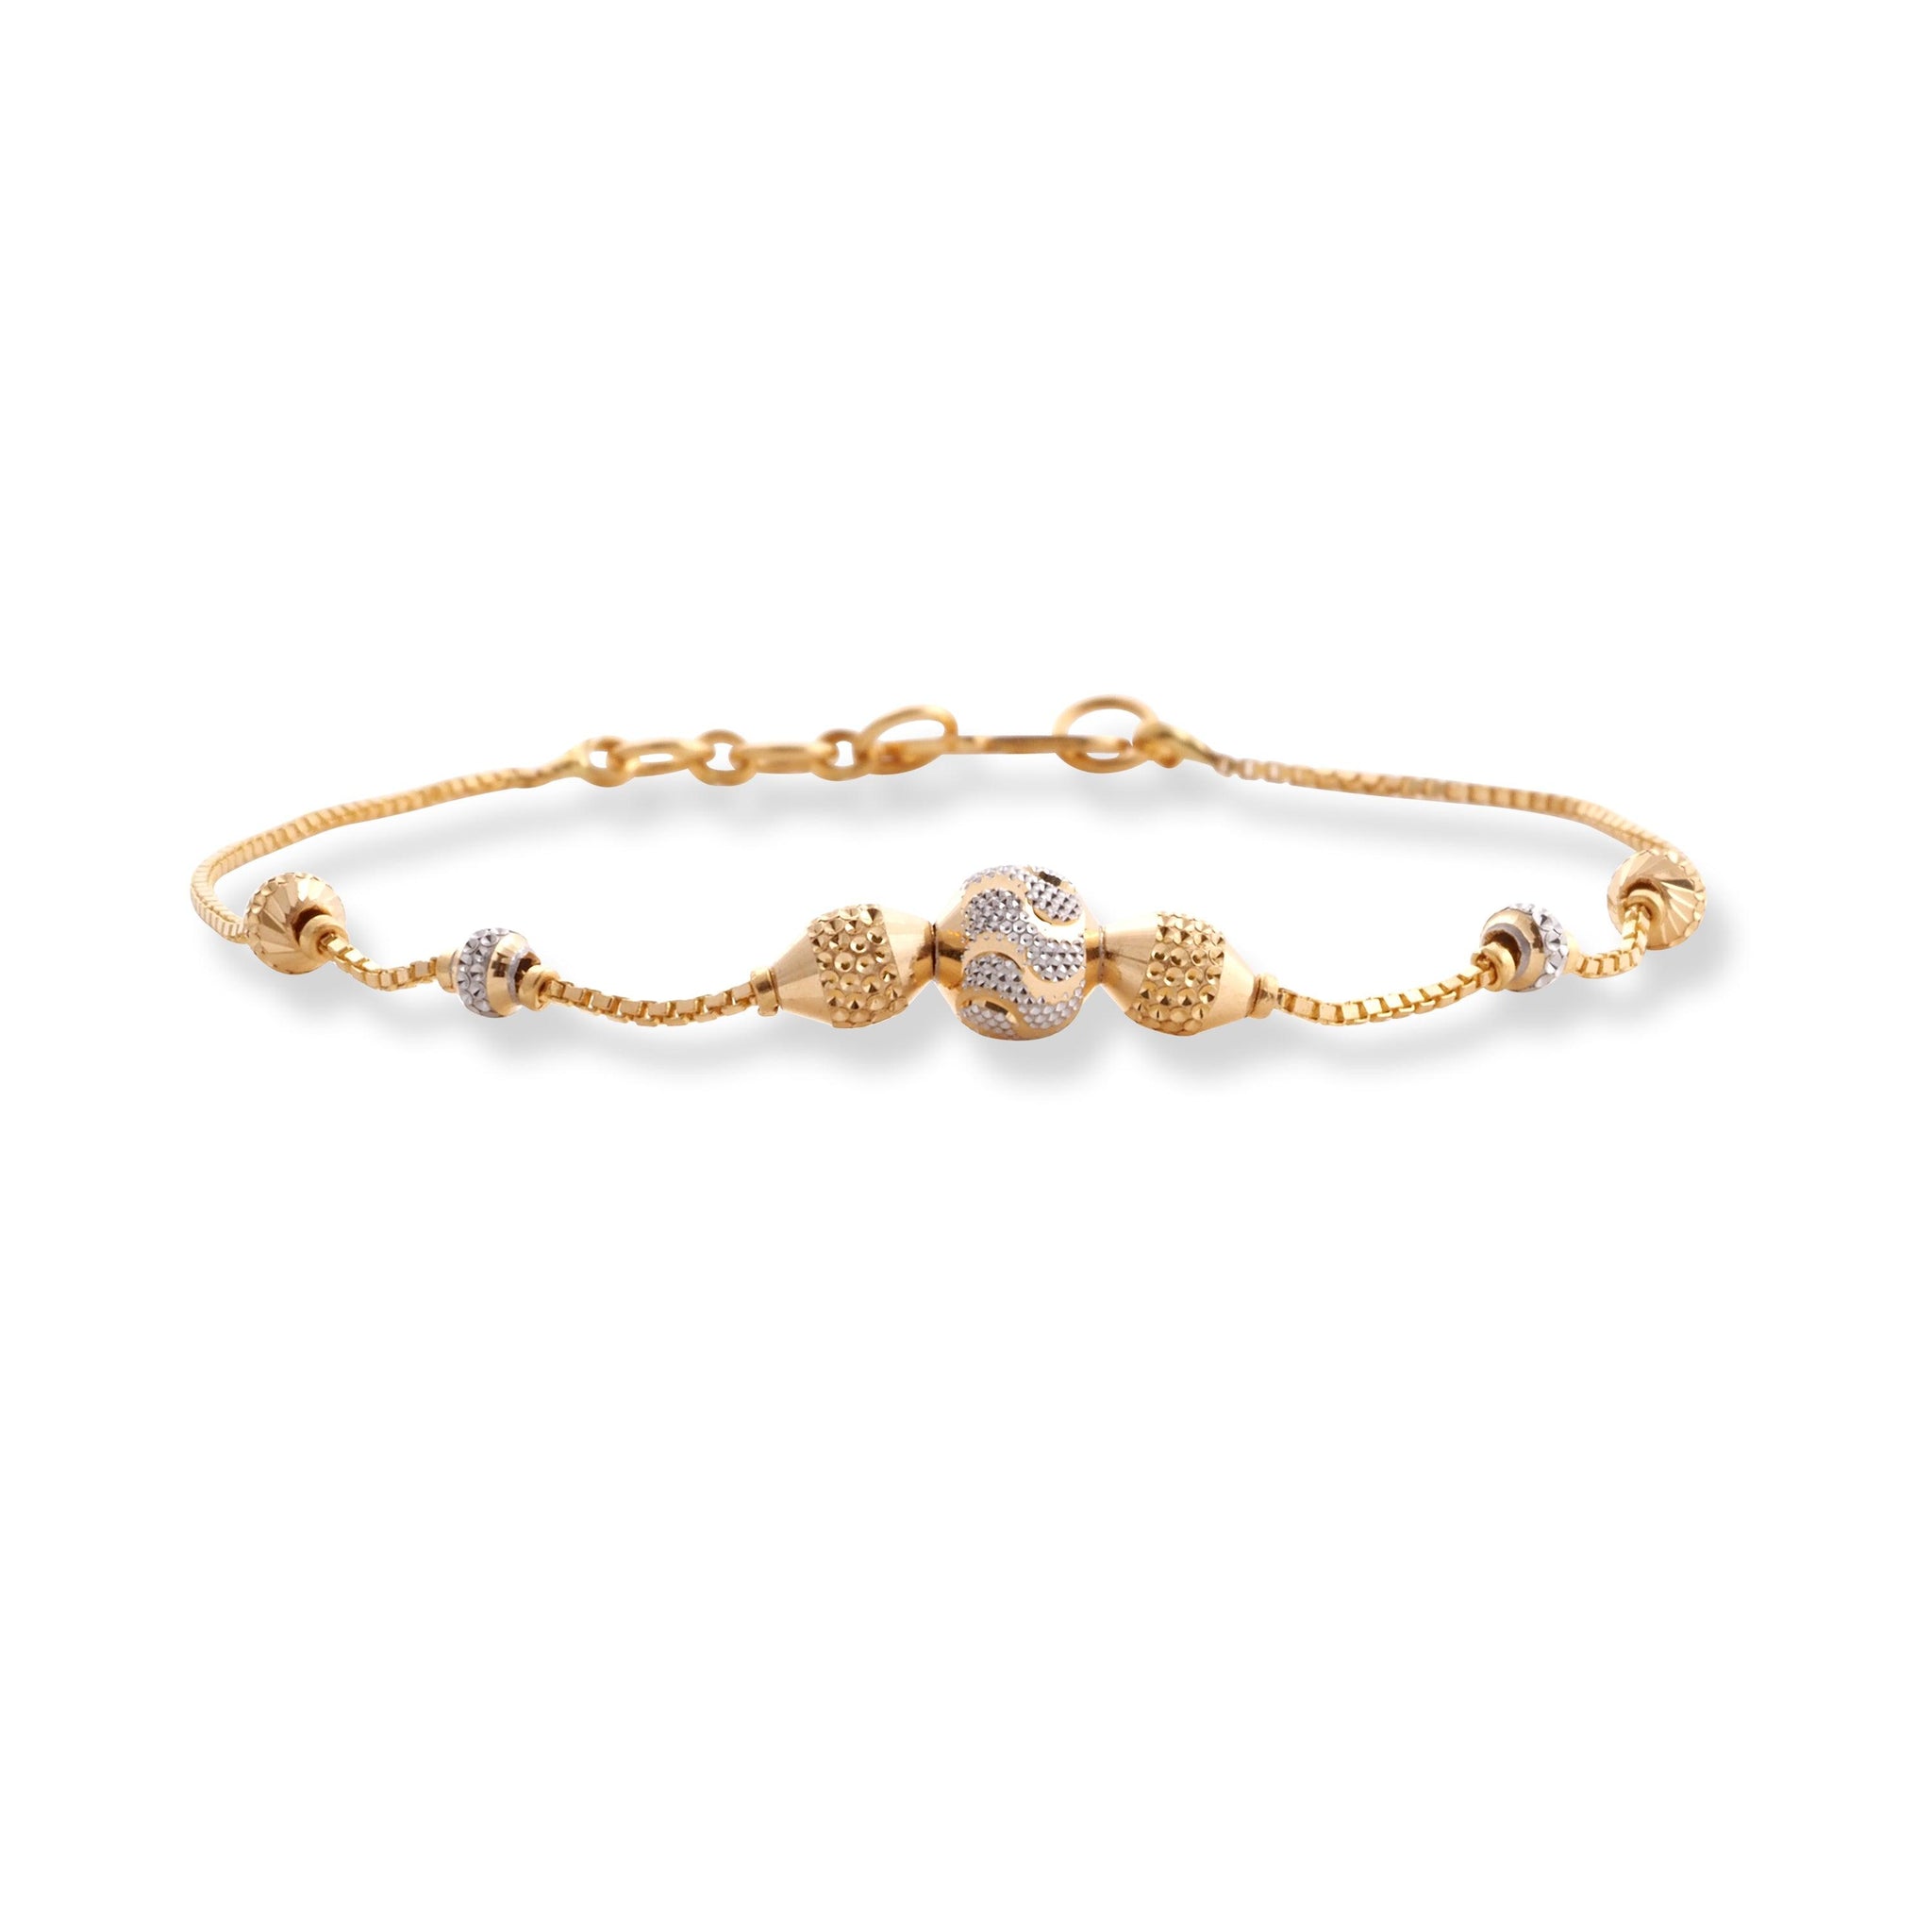 22ct Yellow Gold Bracelet in Diamond Cutting Beads Design with ''S'' Clasp LBR-8502